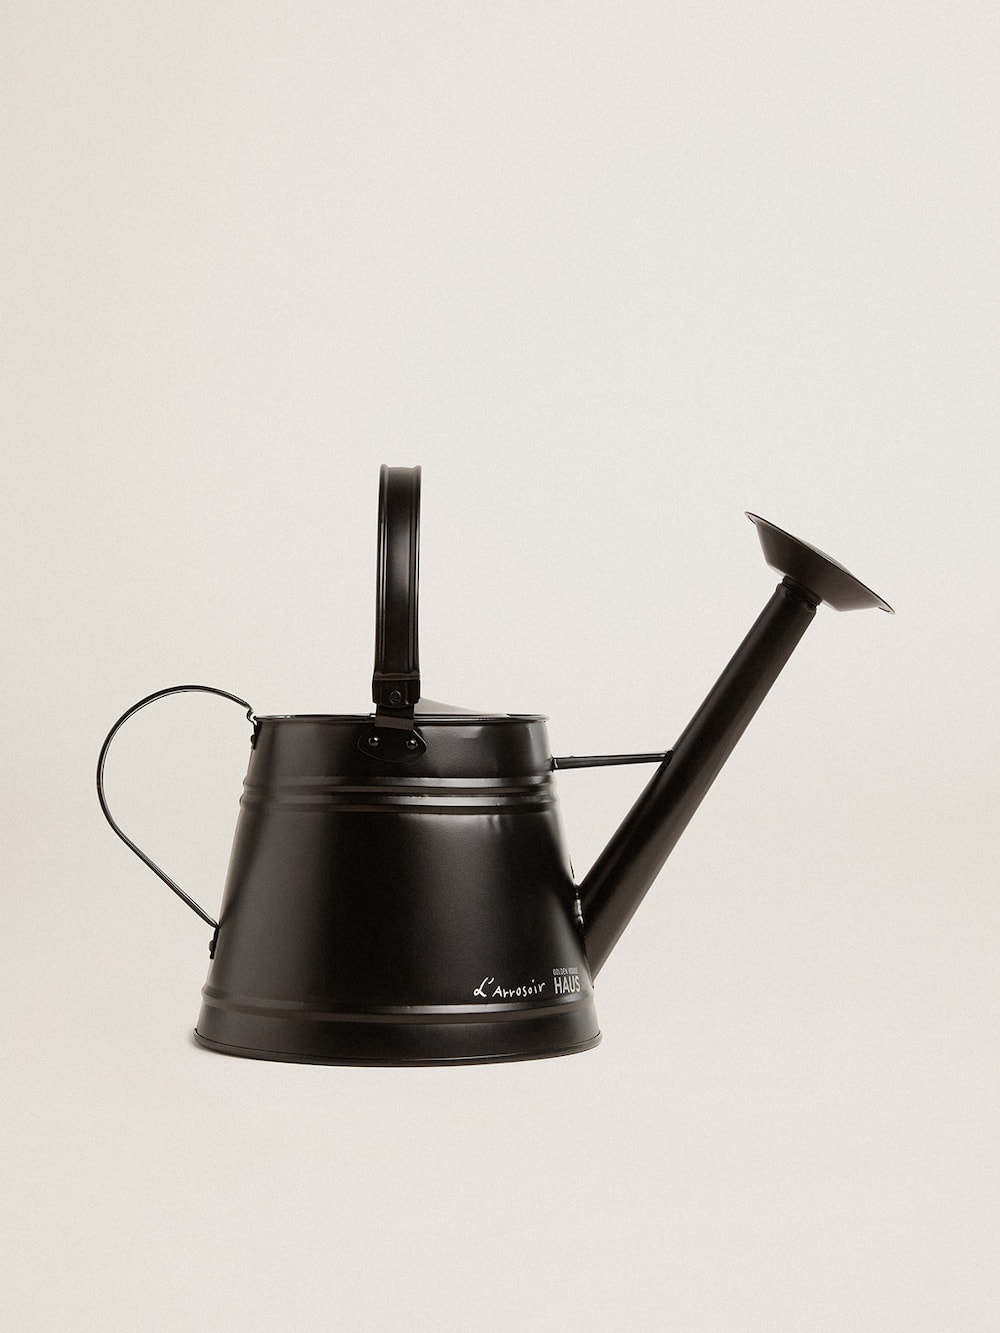 Golden Goose - Watering can Dreamed by L'Arrosoir HAUS of Dreamers exclusive in 